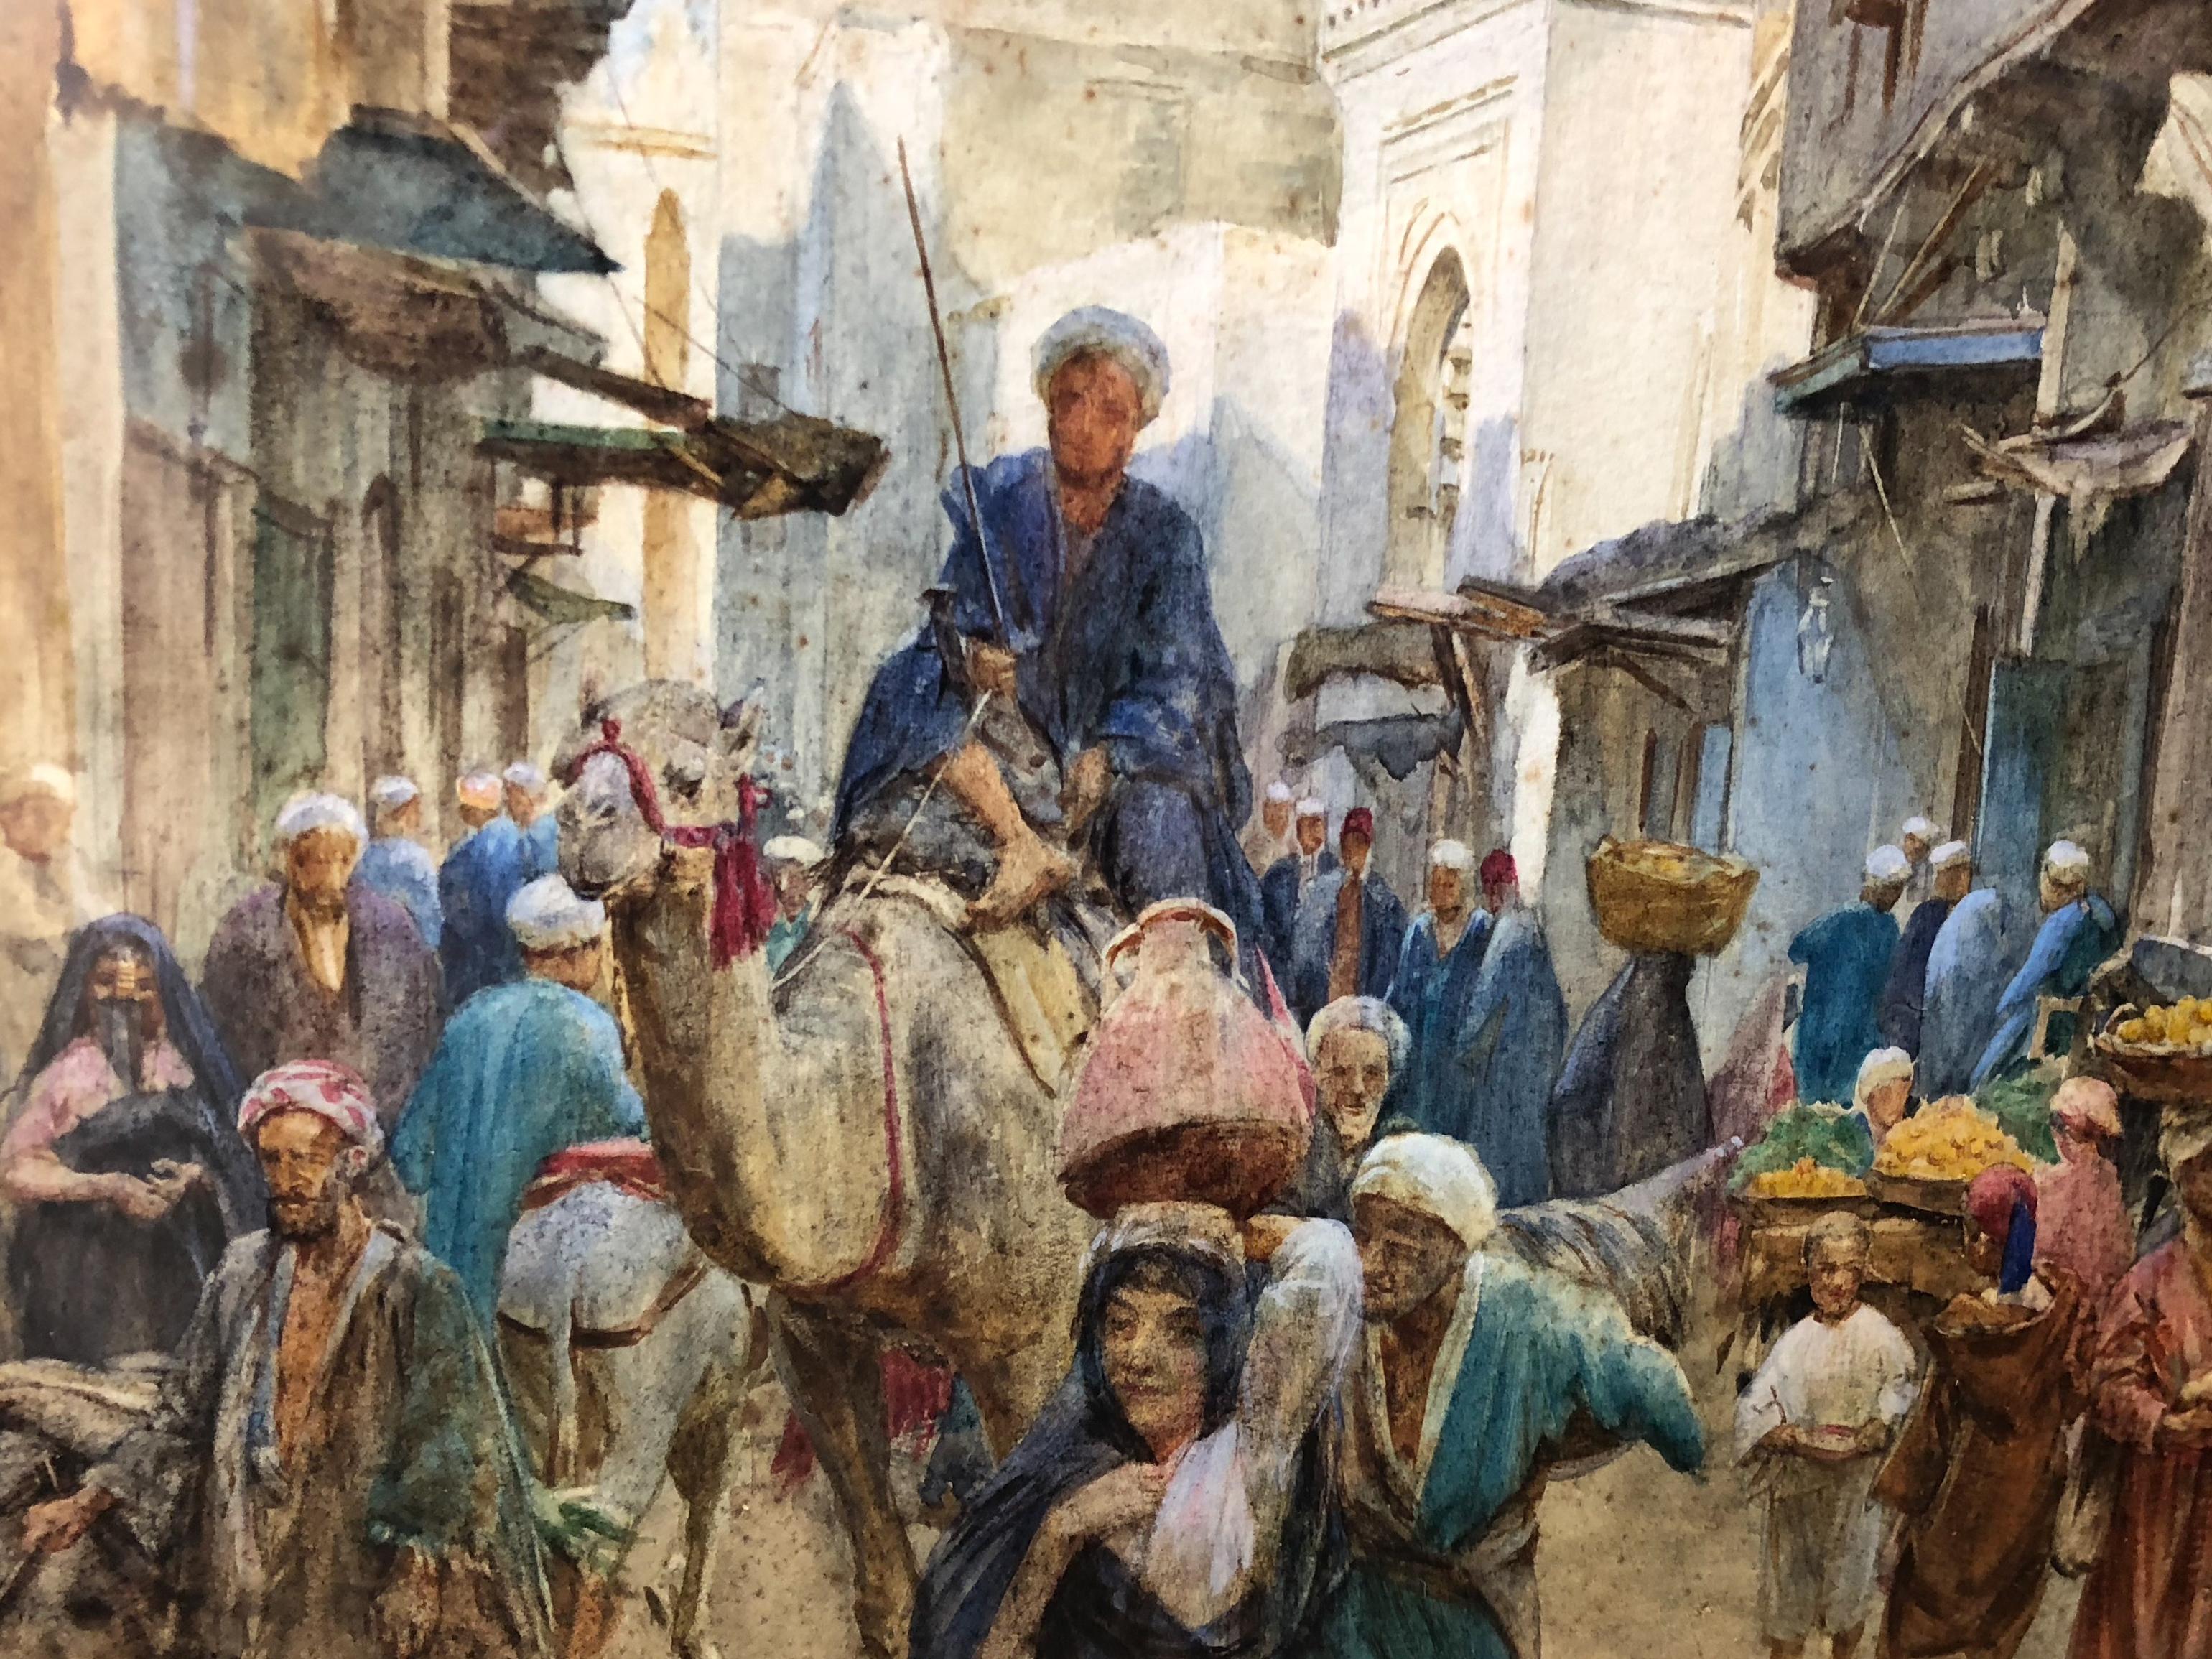 Bazaar Scene in Cairo - Painting by WALTER FREDERICK ROOFE TYNDALE